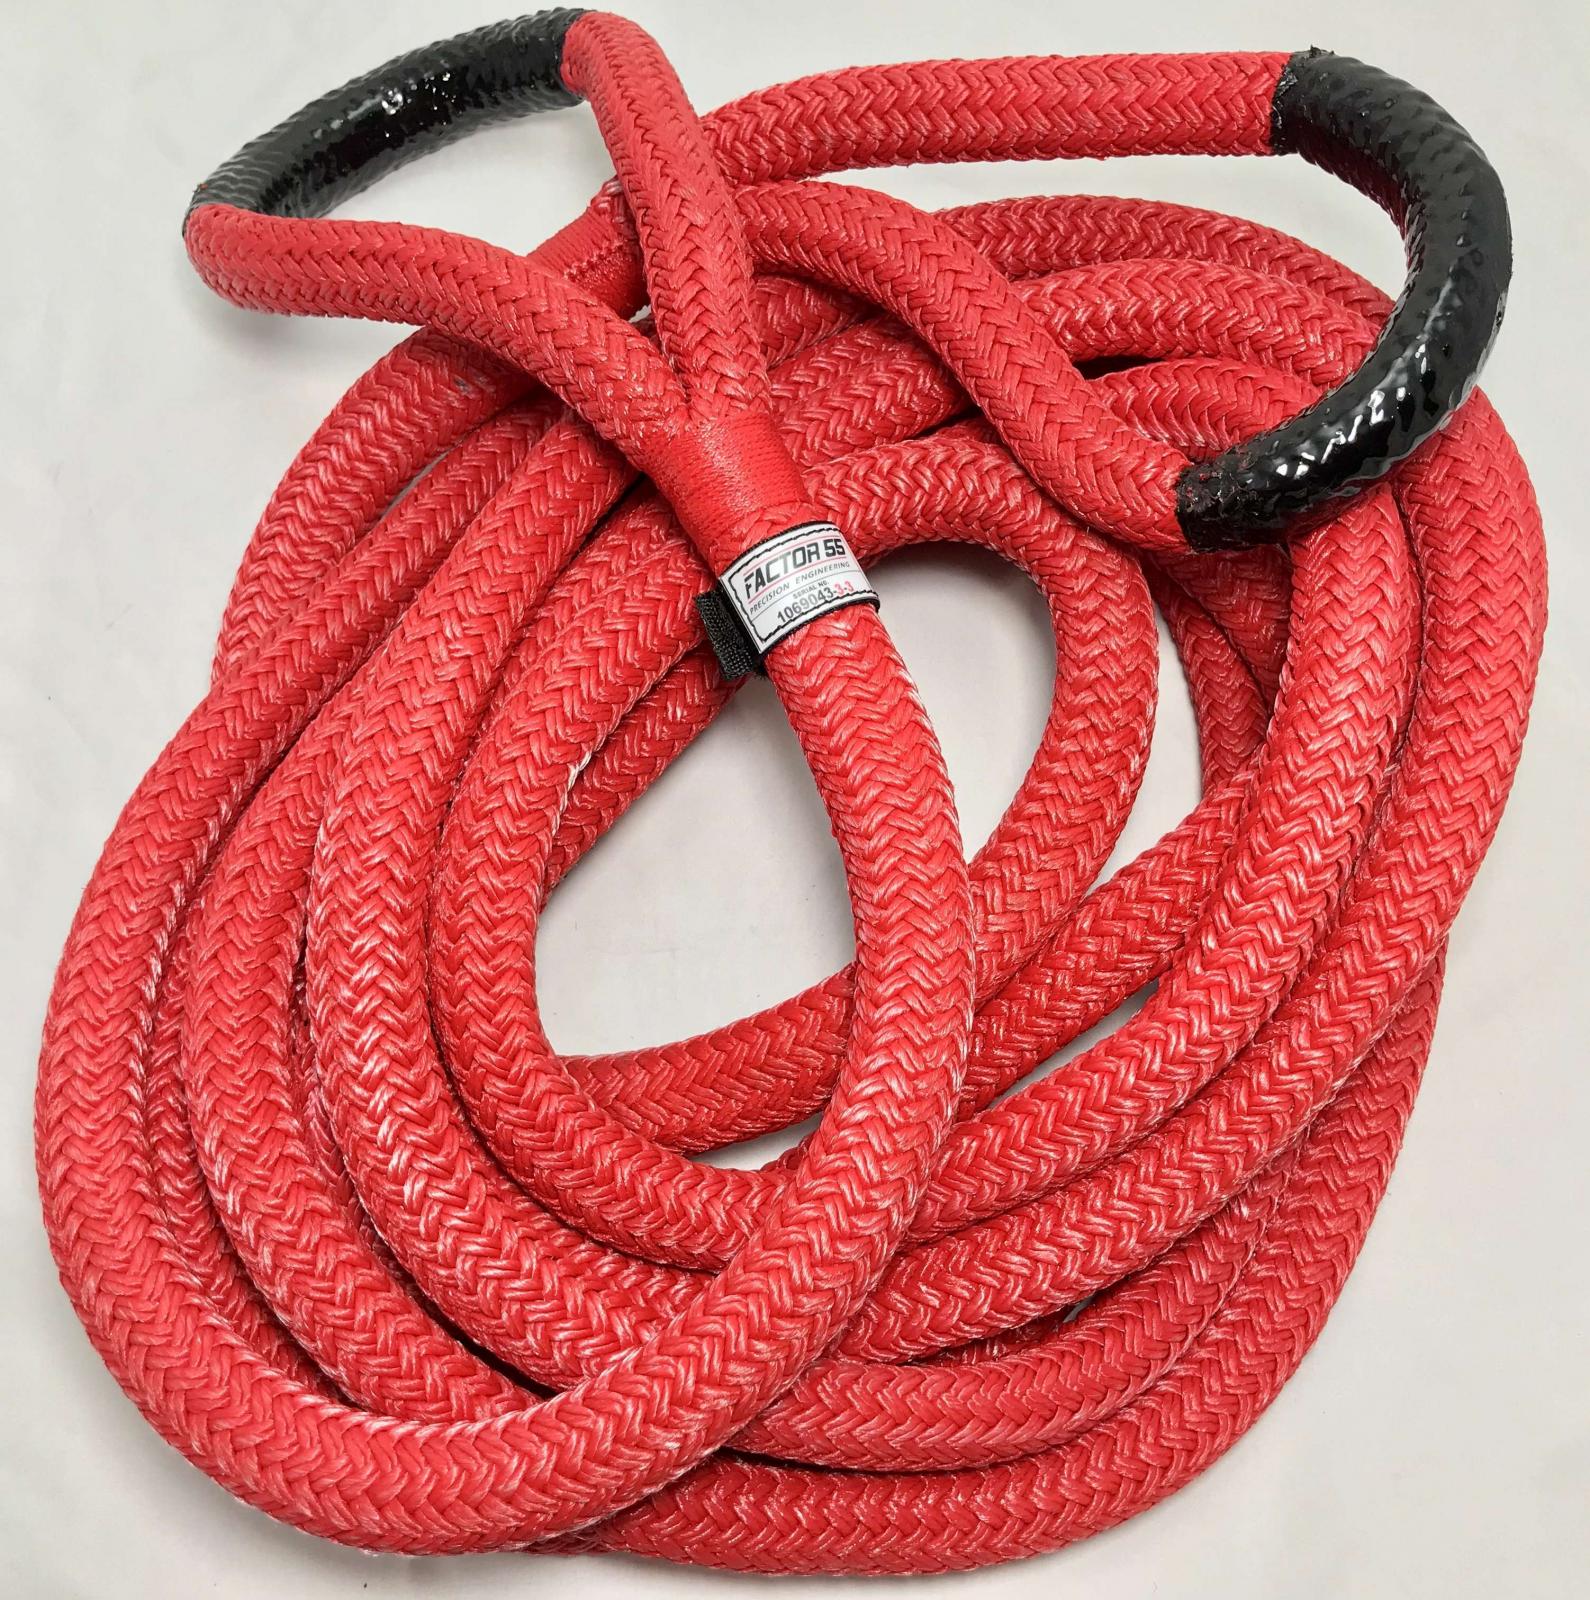 Factor 55 Extreme Duty Kinetic Energy Rope 7/8 Inch x 30 Foot Factor 55 - Click Image to Close